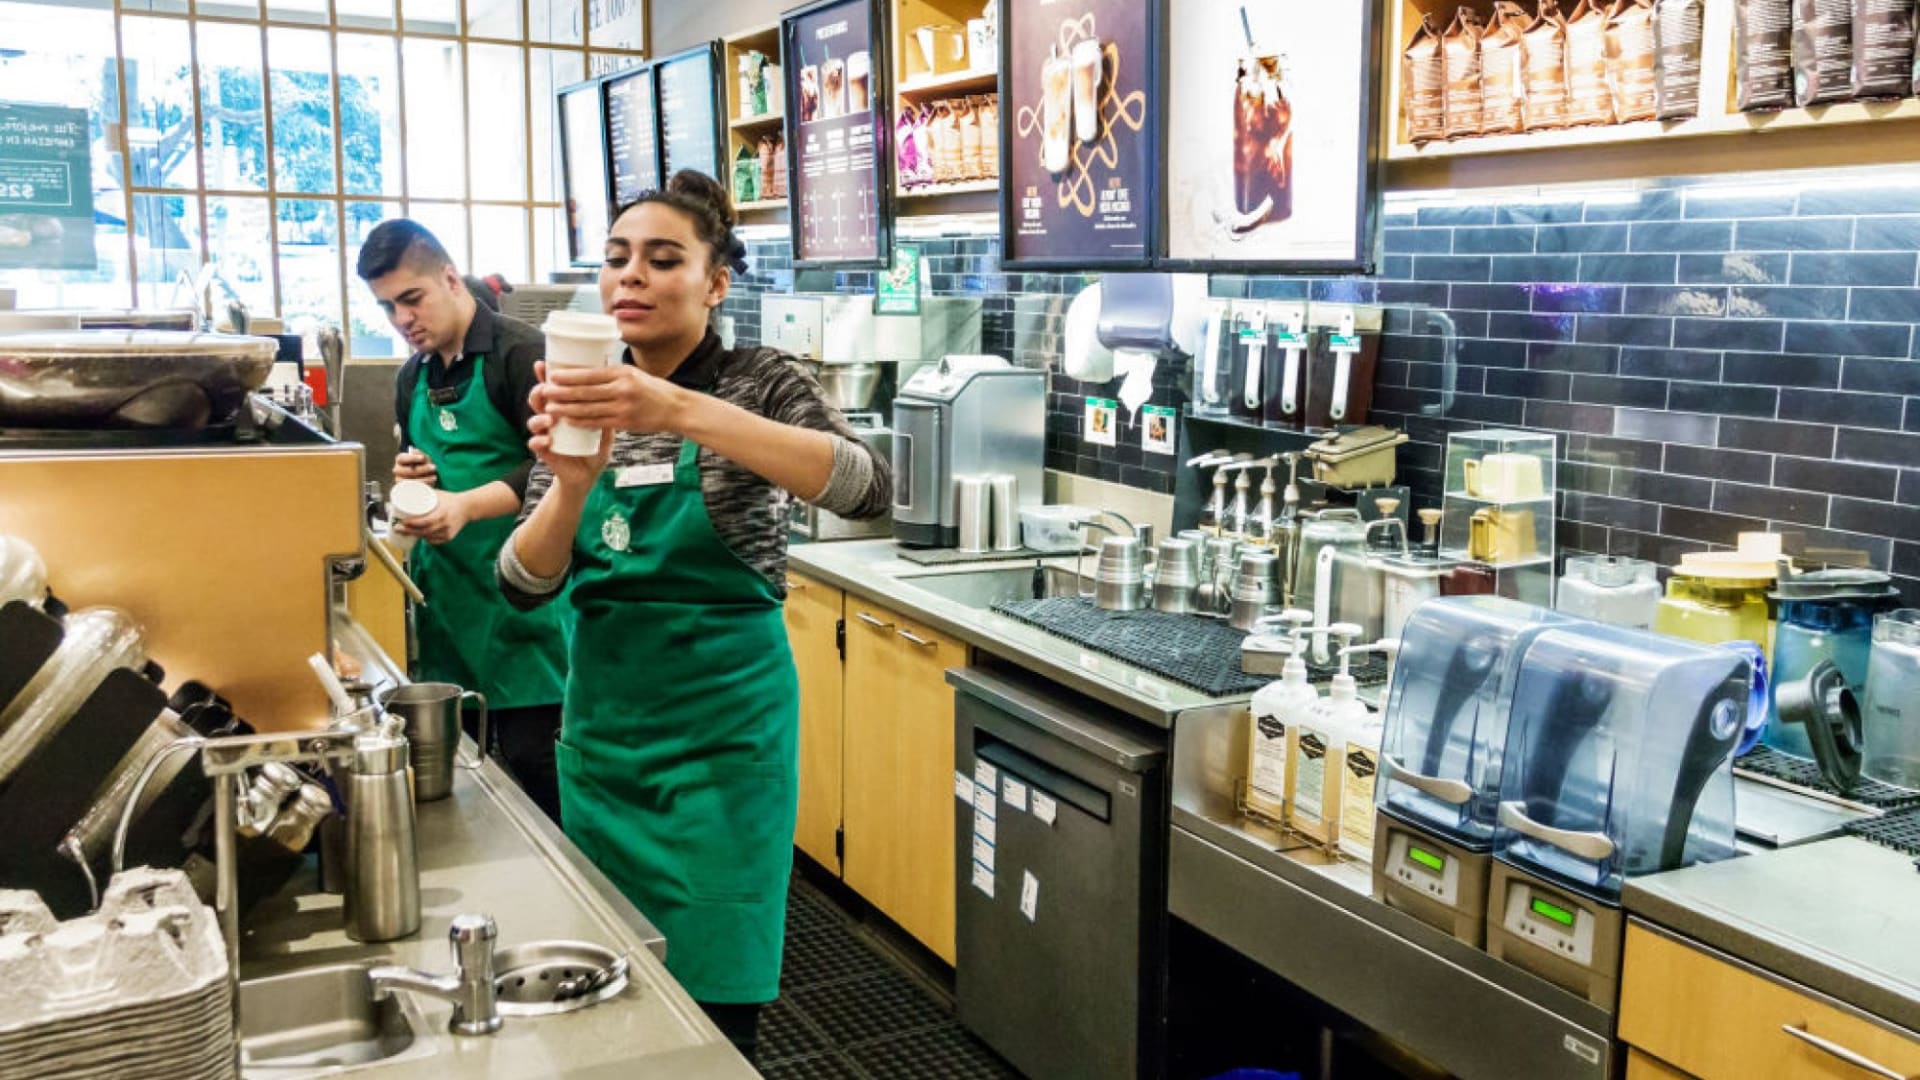 Starbucks's CEO Admitted the Company 'Lost Its Way.' It Turns Out the Thing It Needs Most Is a New Blender